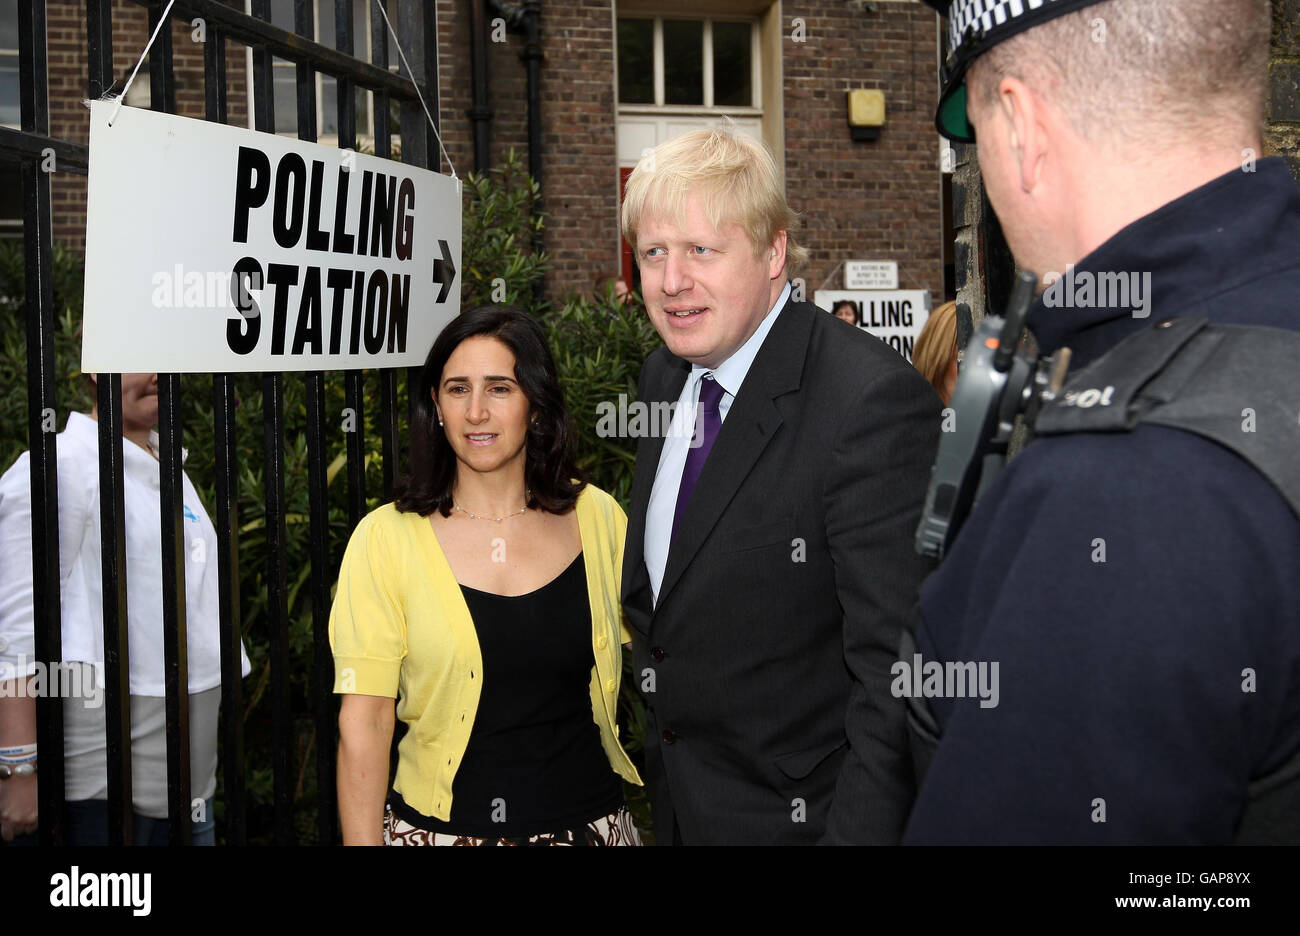 Conservative candidate for London Mayor Boris Johnson and his wife Marina leave a polling station at Laycock Primary School, Islington, London, after voting in today's London Mayoral and local elections. Stock Photo